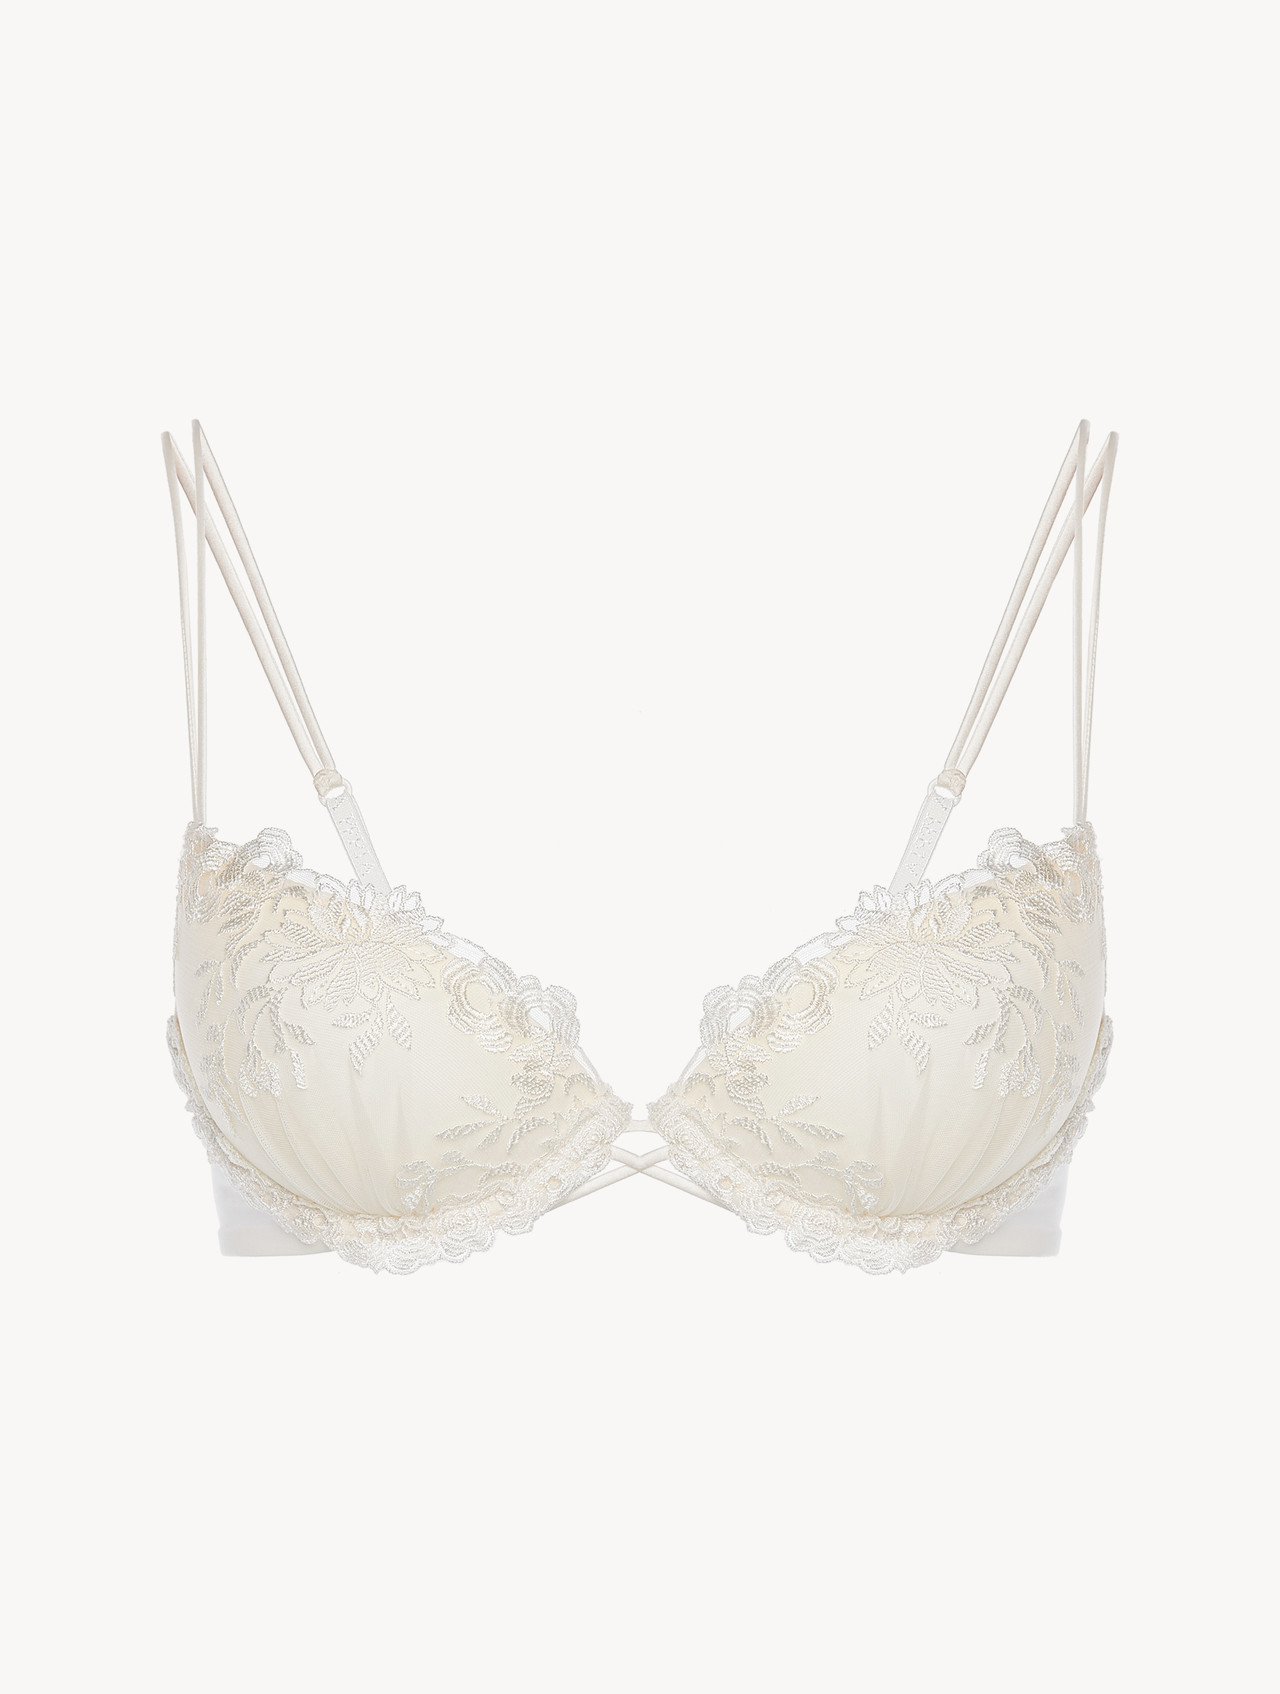 Lycra Underwired Bra in White with Embroidered Tulle | La Perla